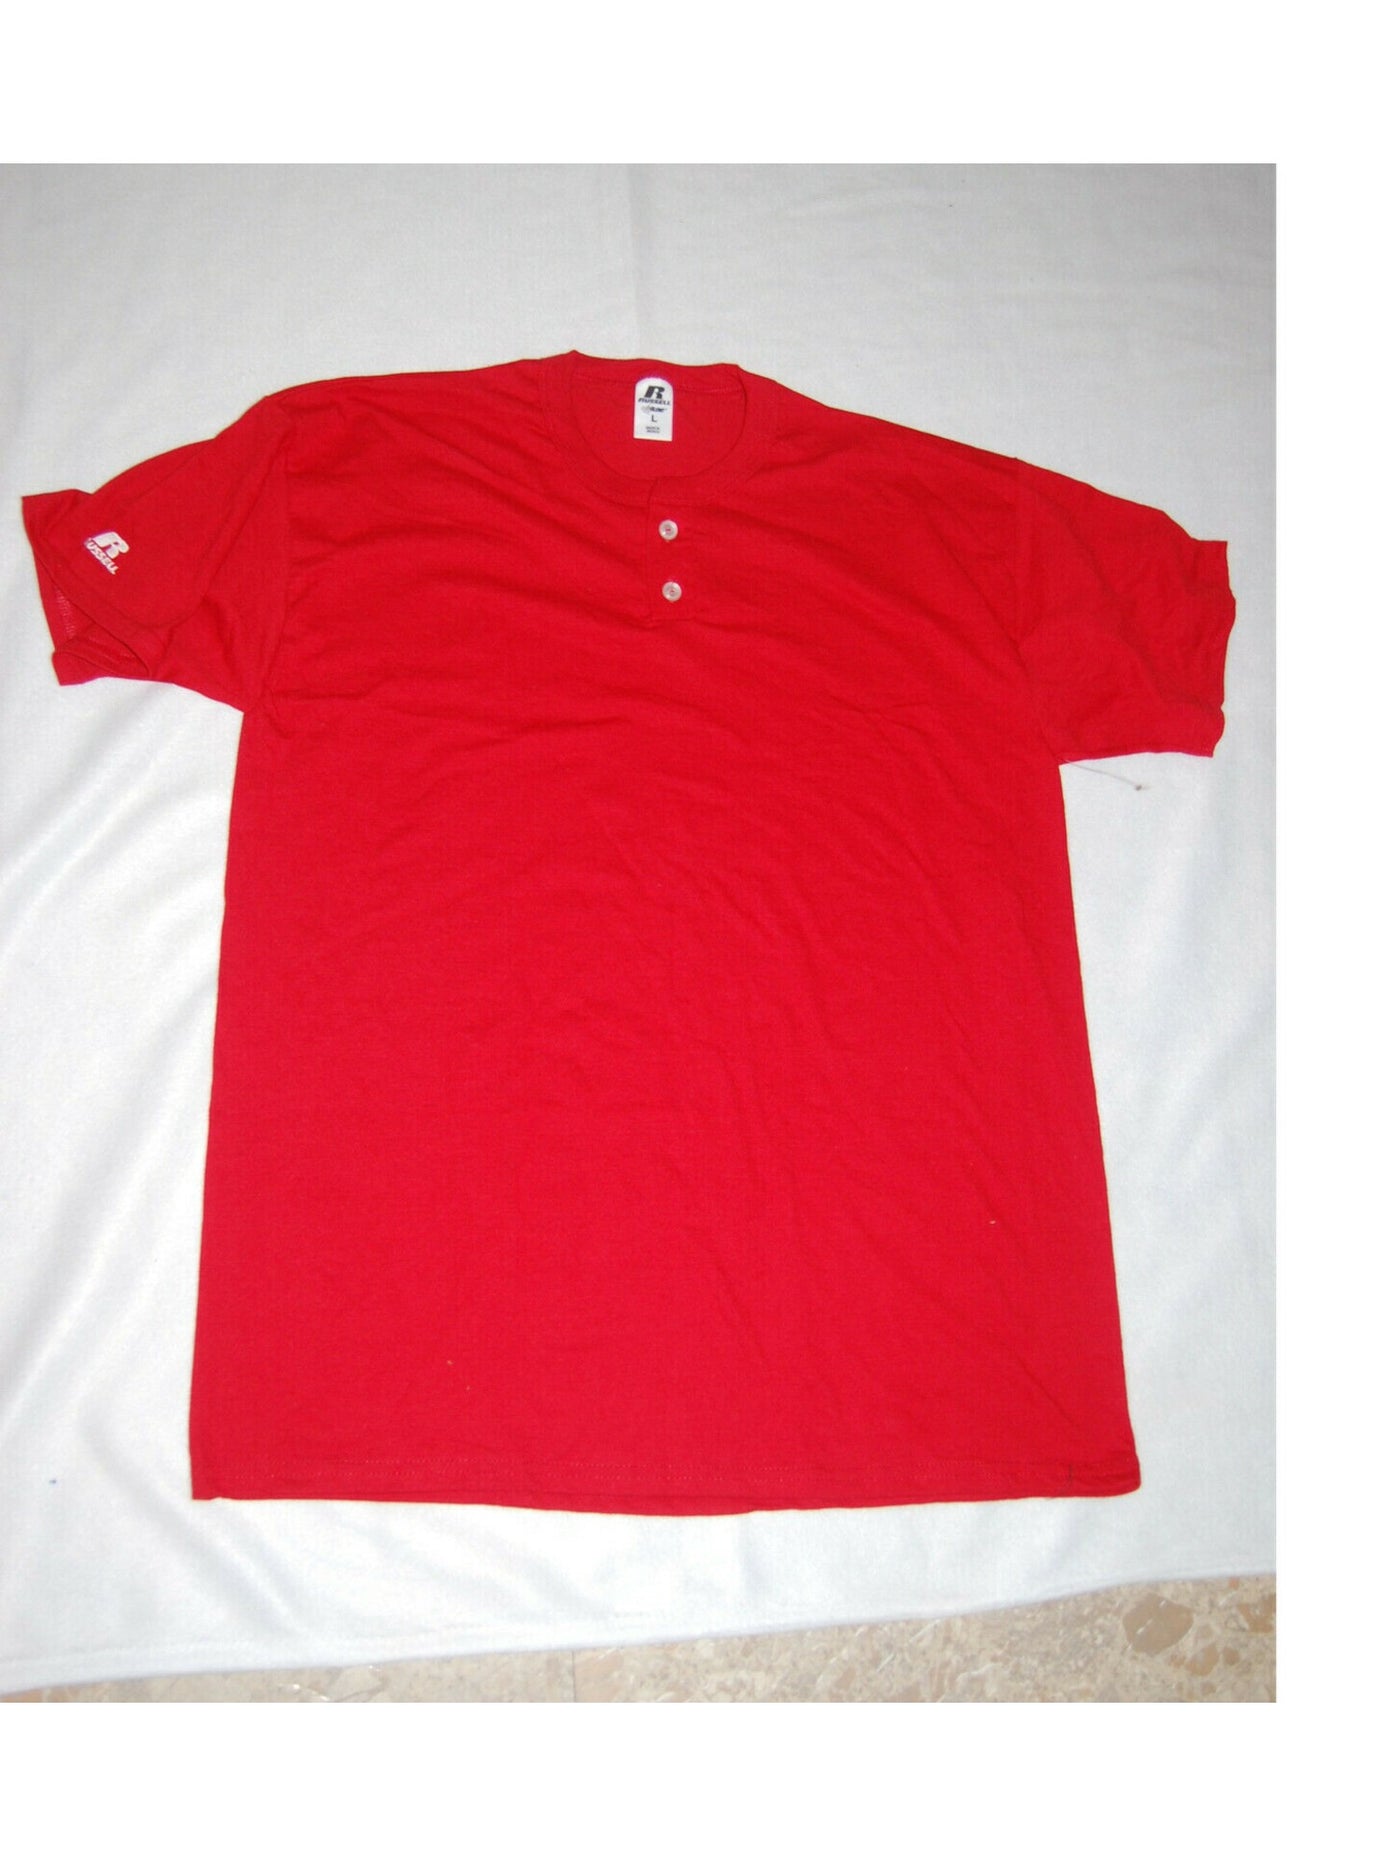 RUSSELL Mens Red Crew Neck Classic Fit Henley Shirt S